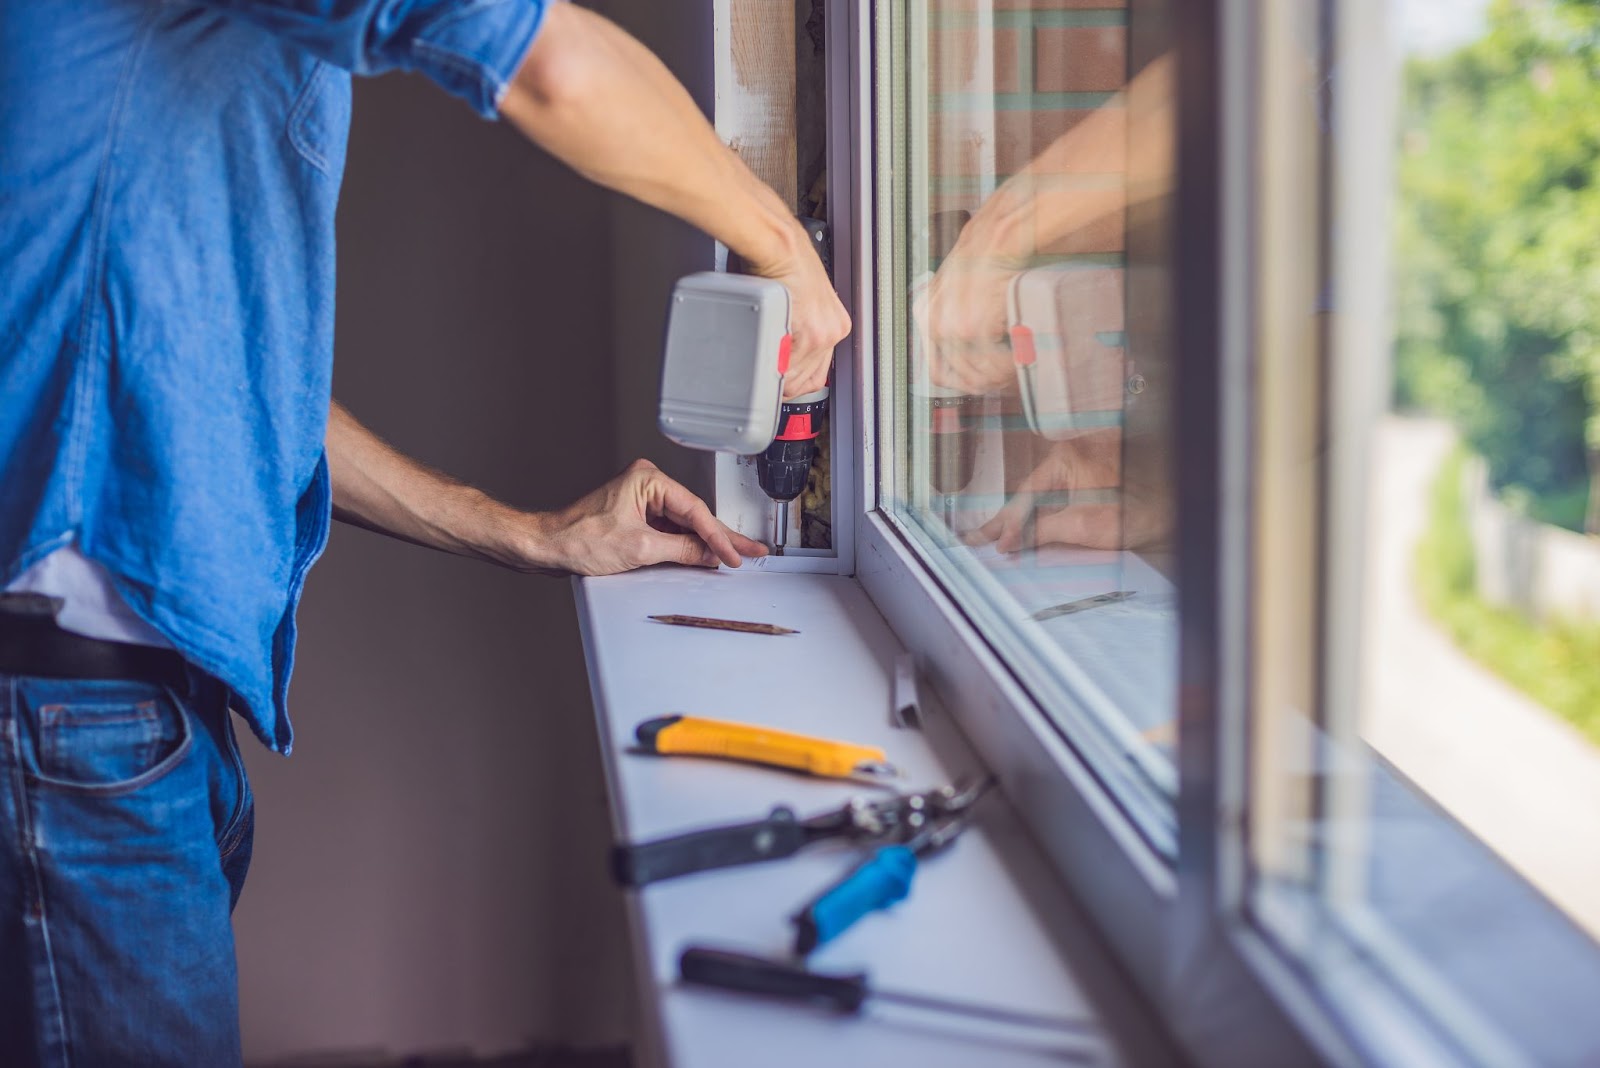 Here’s how to replace the windows in your house